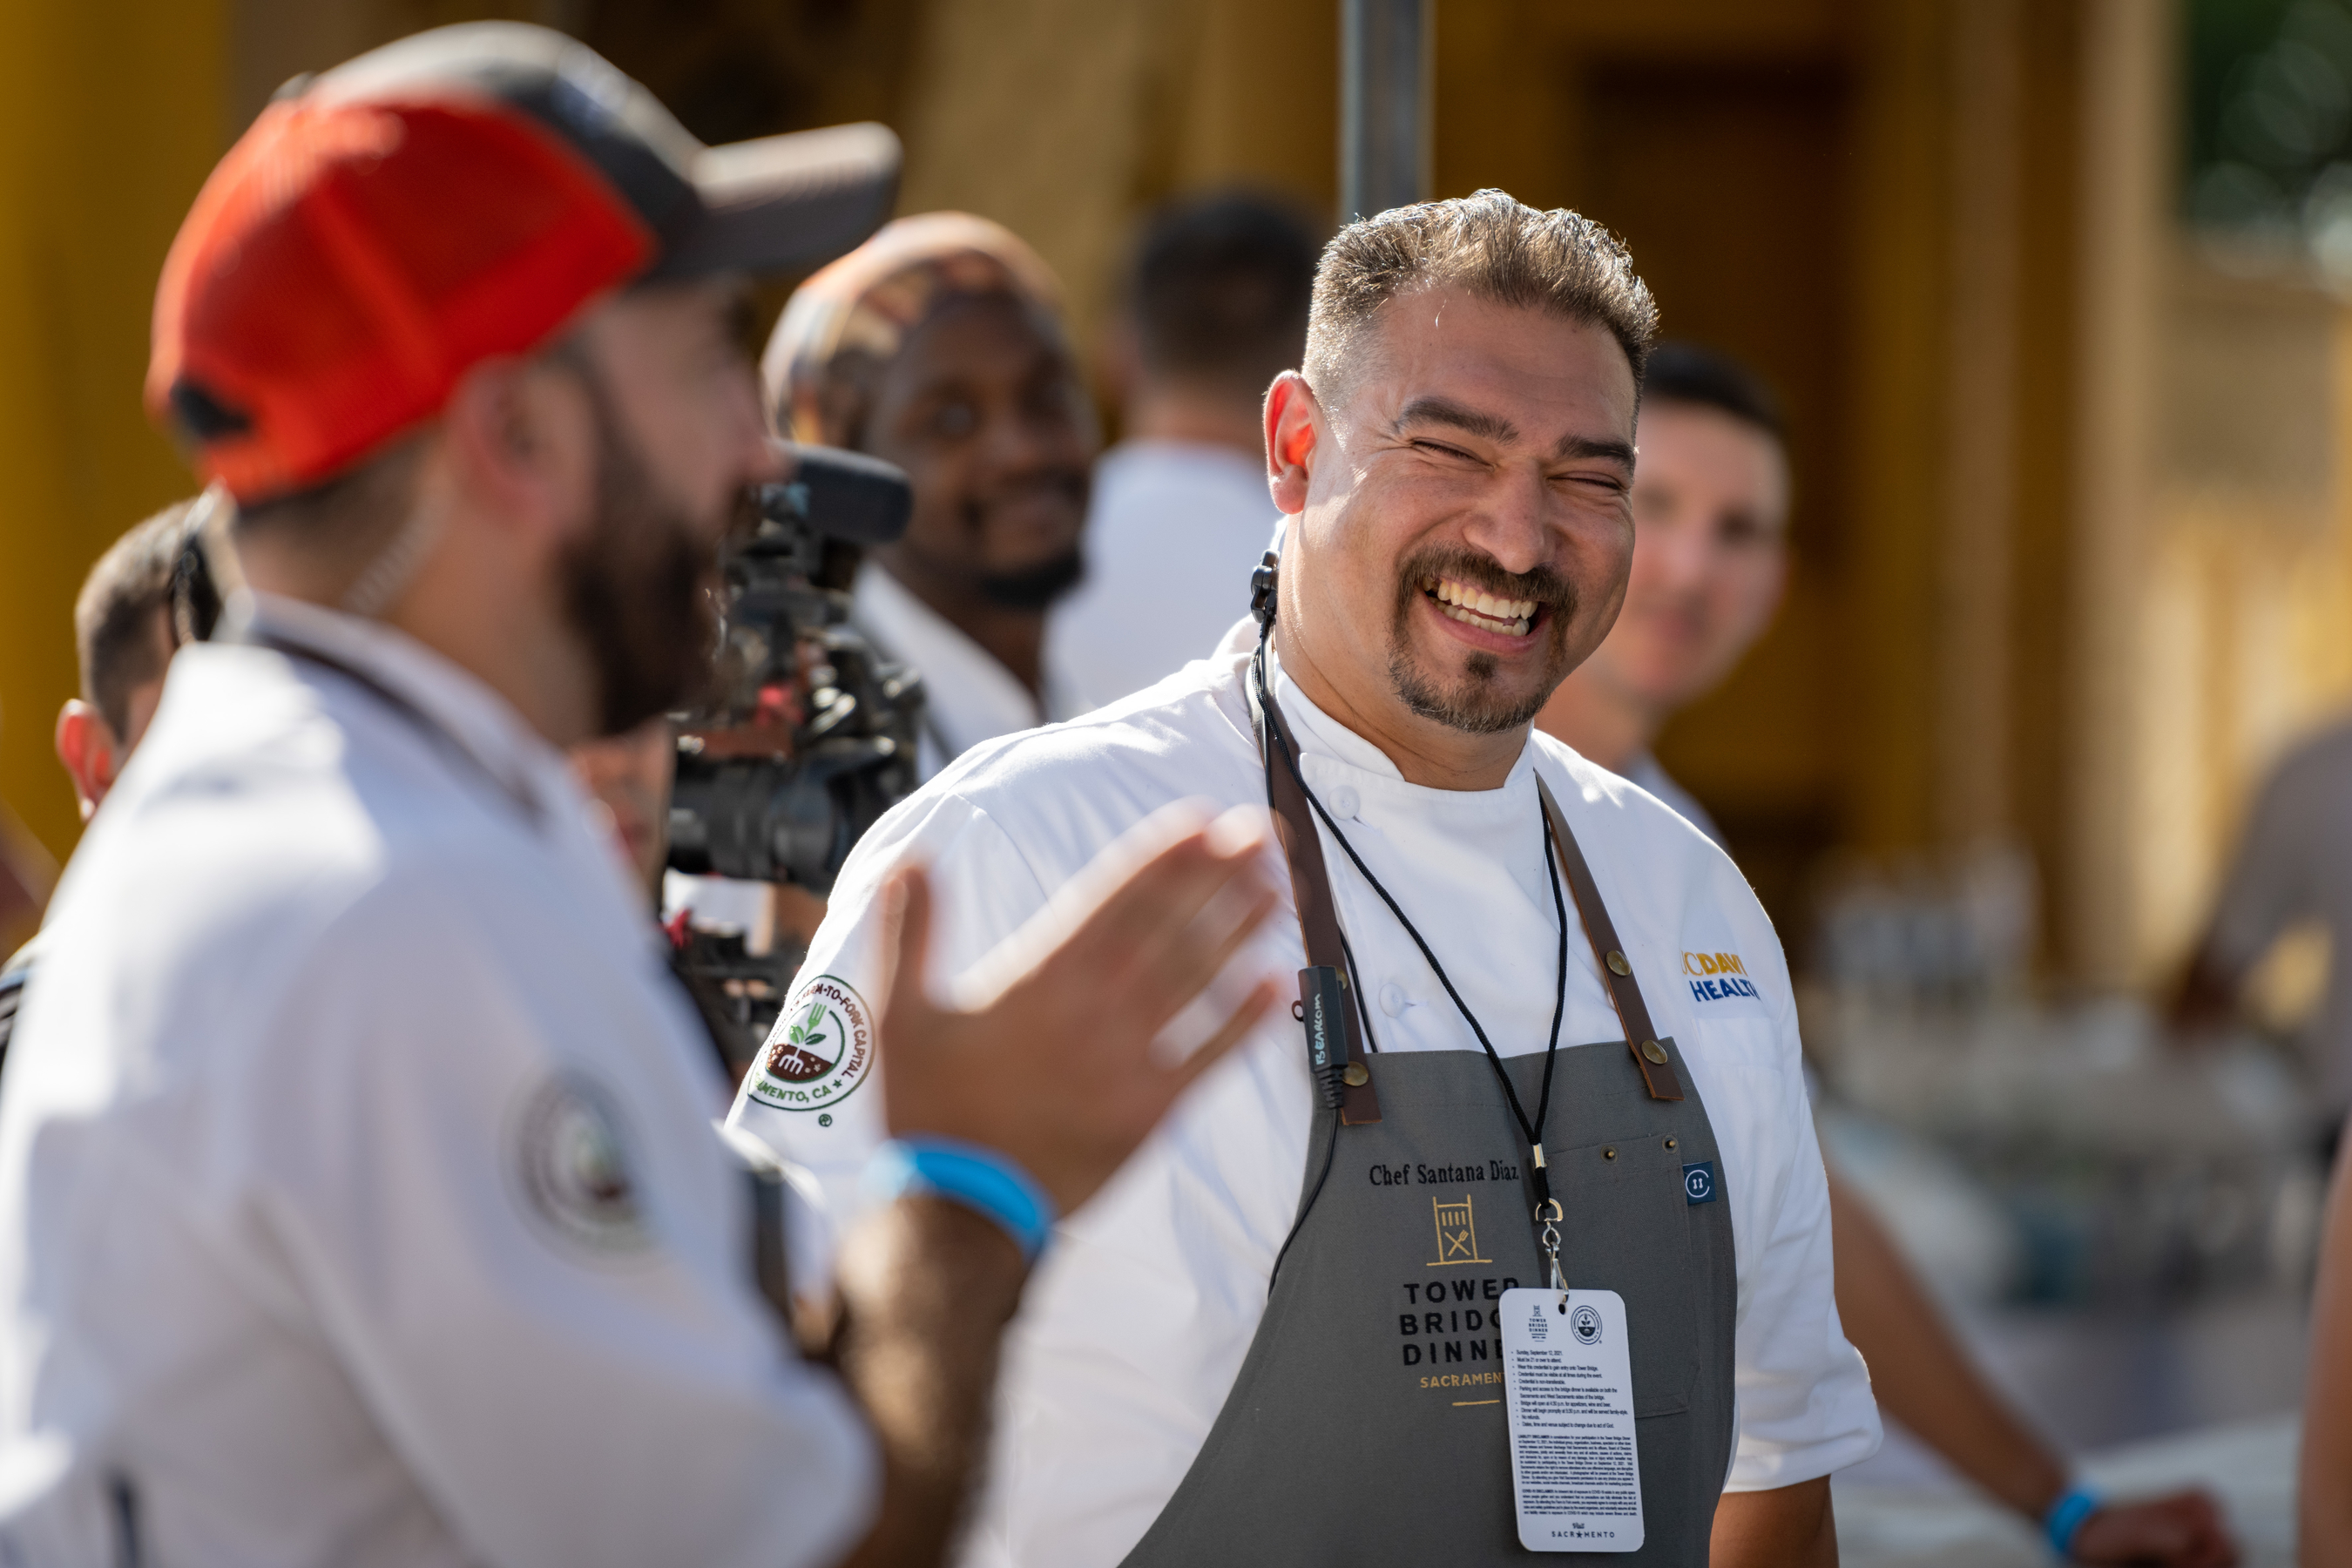 Chef Santana Diaz oversaw a meal for more than 800 on the Tower Bridge